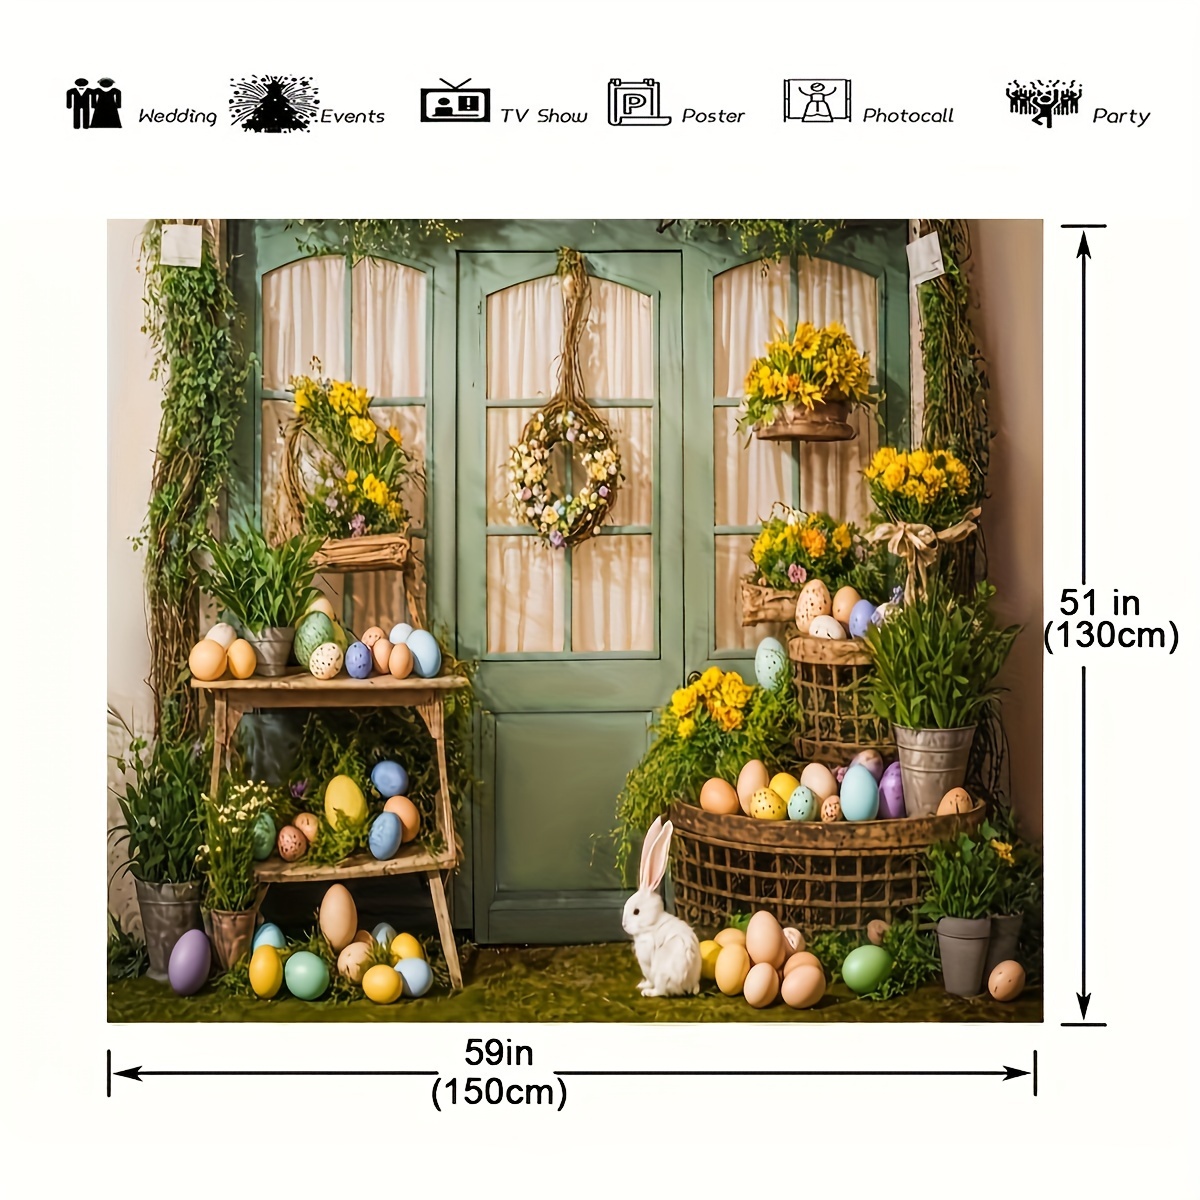 1pc easter day garden decor photography backdrops colorful eggs spring fresh flowers cute white bunny photo background